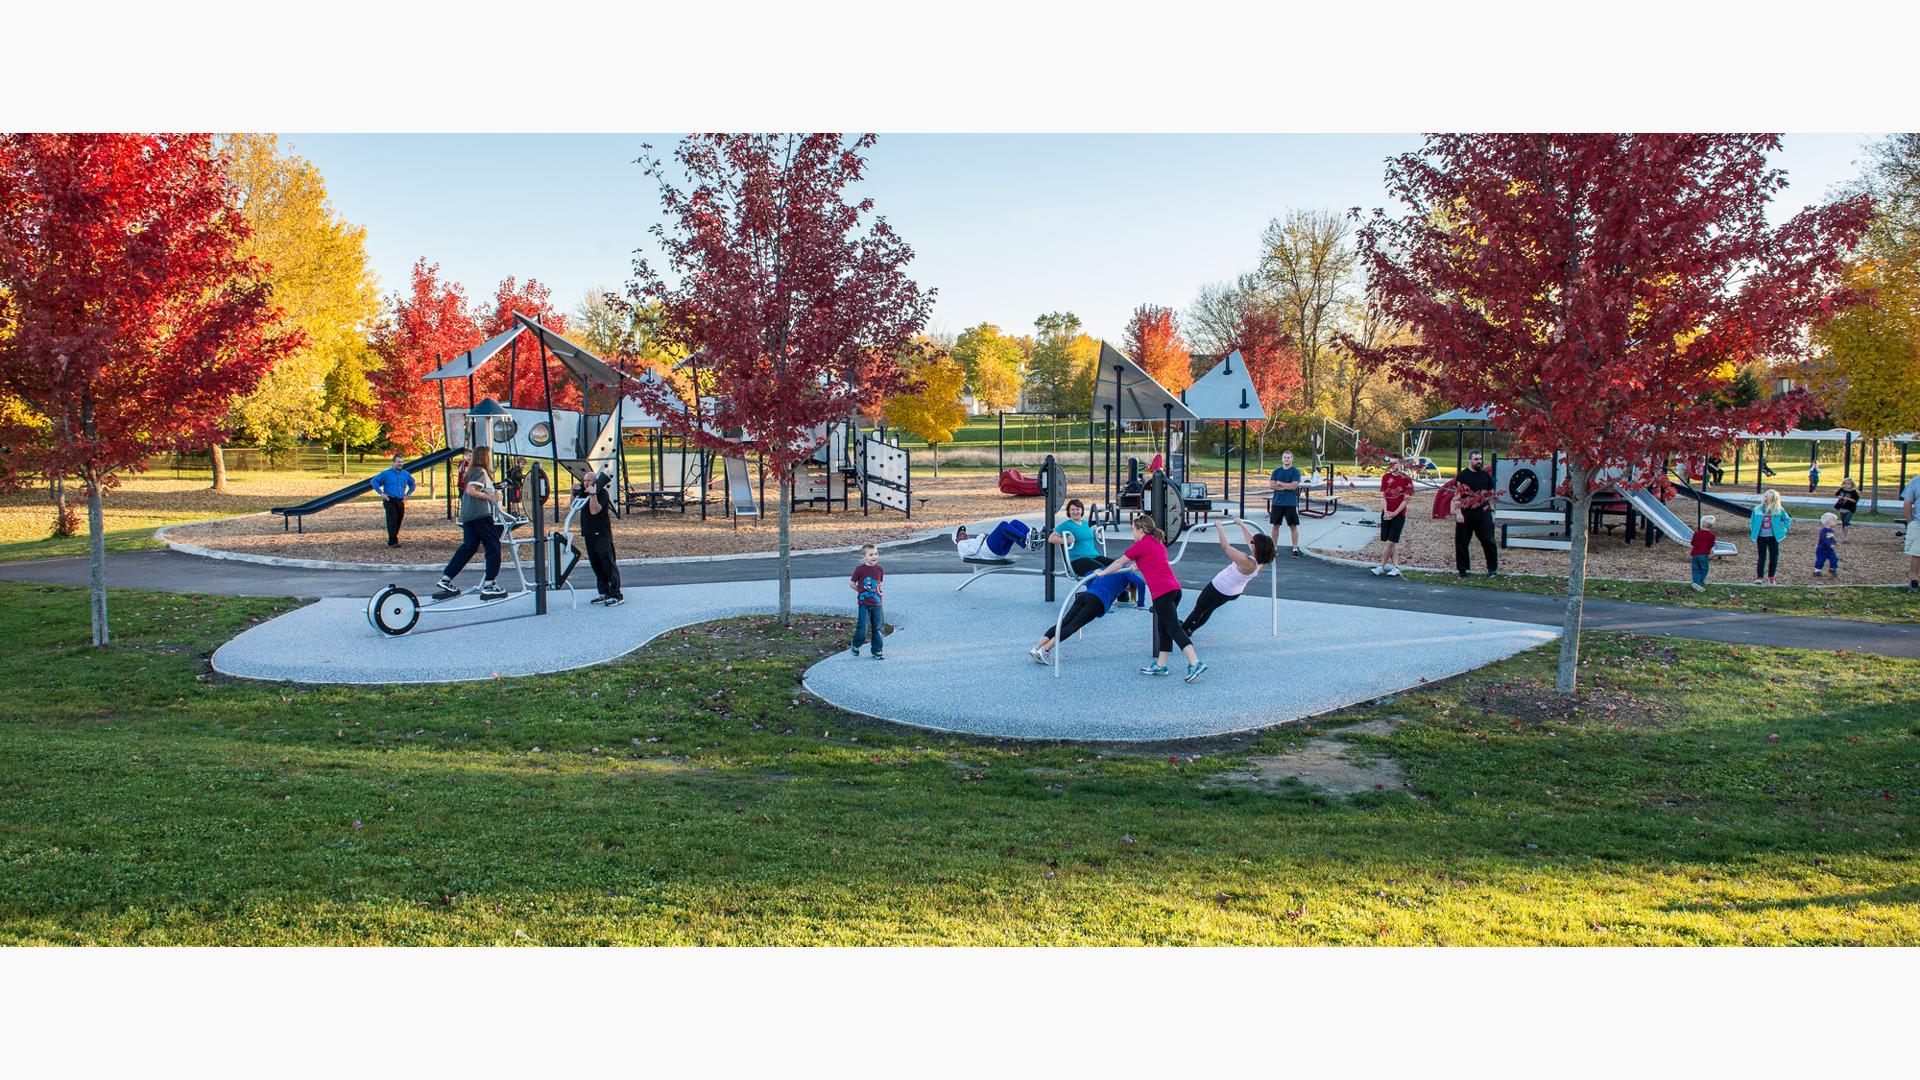 One part fitness. One part playground.  All fun. While adults use the exercise equipment, children in the background play on the custom PlayBooster play system at Barb King Inspiration Park. A custom  one-of-a-kind park built in honor of Play LSI cofounder Barbara King.